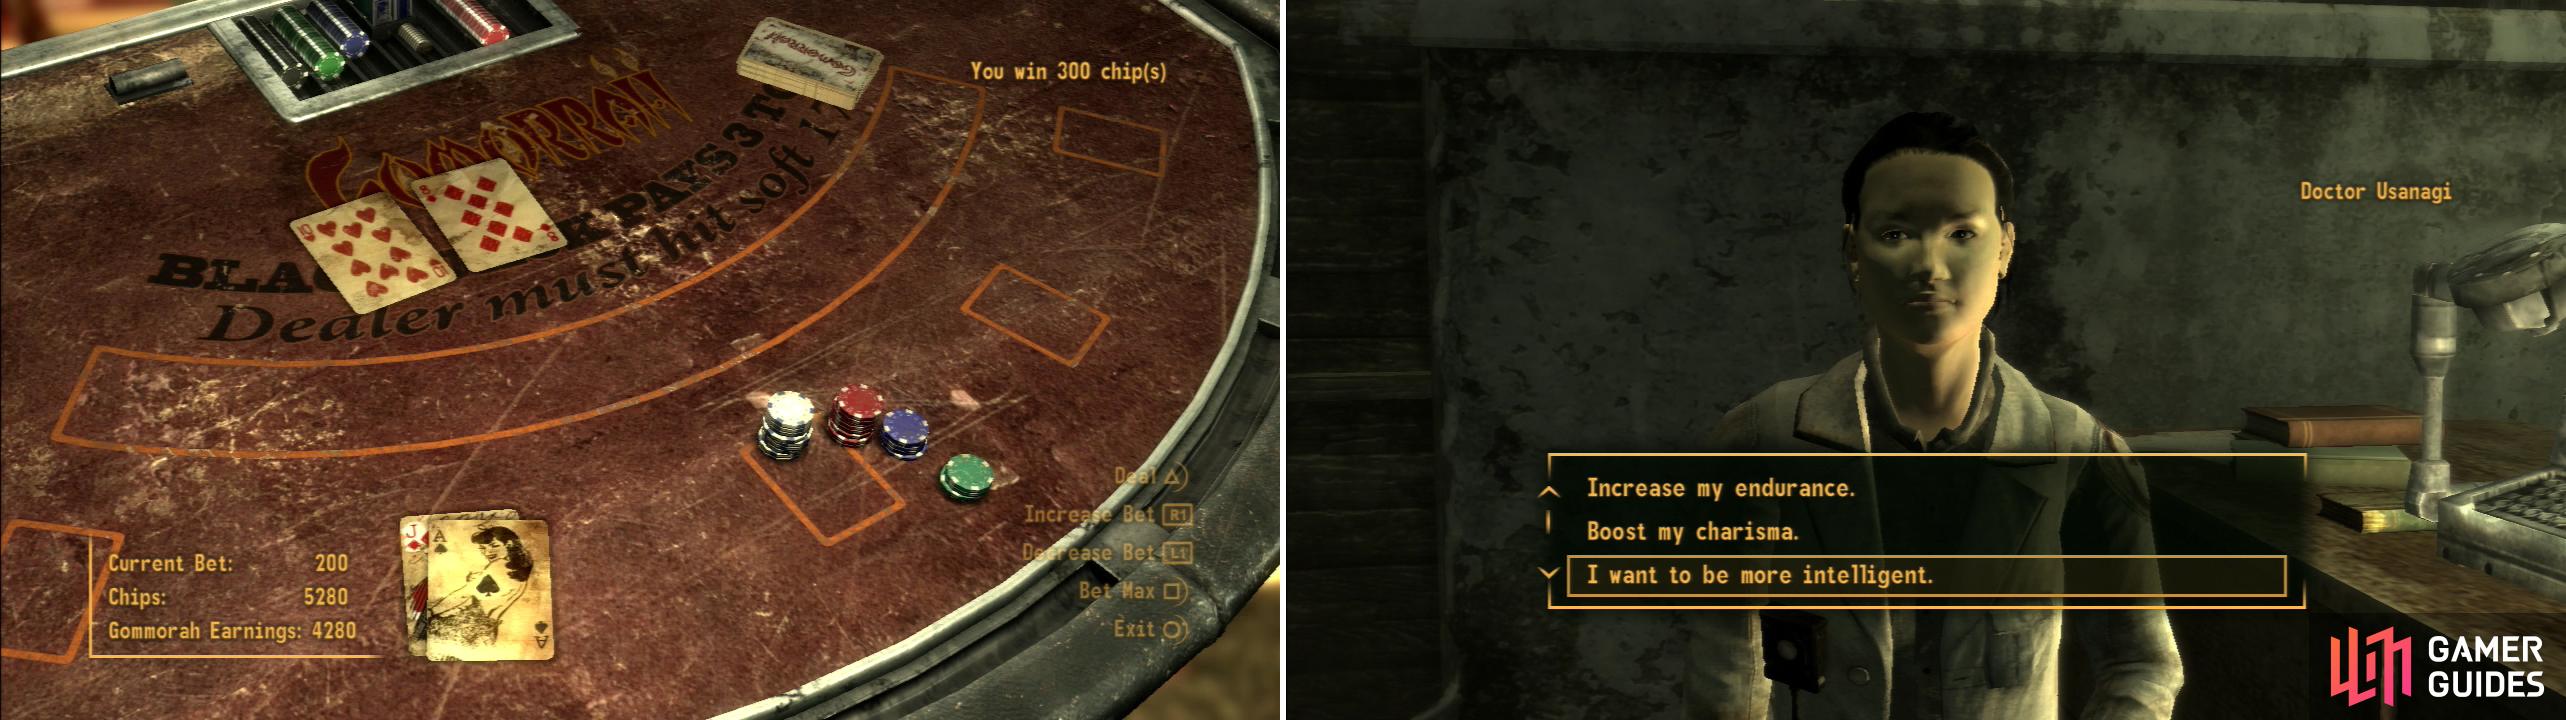 Repeat the process you used to win money at the Atomic Wrangler in Gomorrah and the Ultra-Luxe (left), then spend your winnings buying valuable implant at the New Vegas Medical Clinic (right).